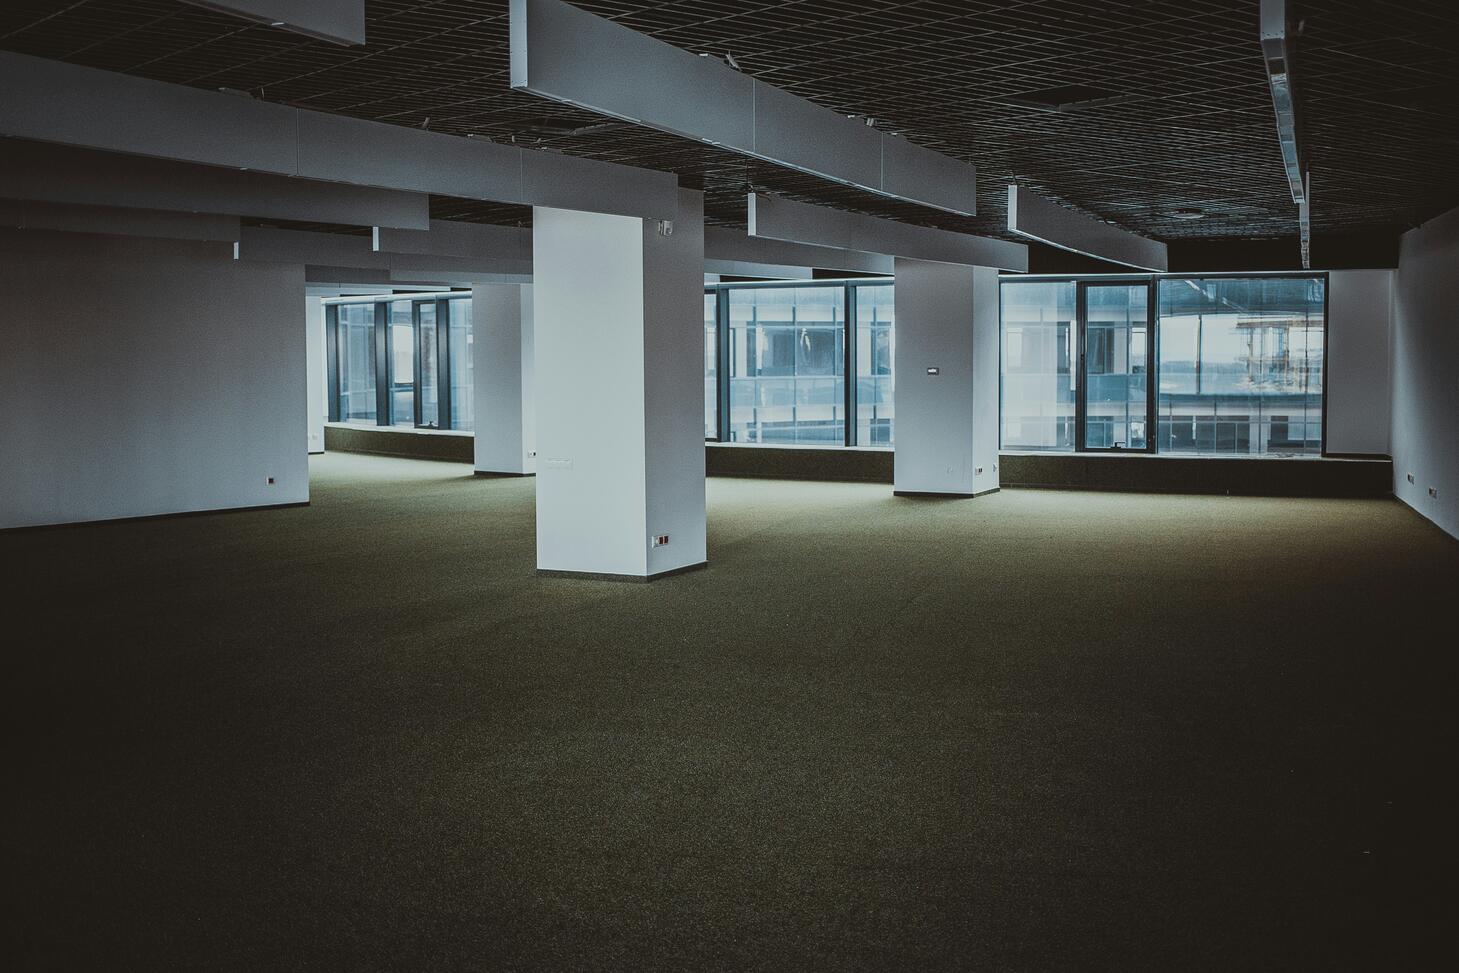 Empty brown and white building photo – Free Grey Image on Unsplash. Photo by Sergei Wing on Unsplash.